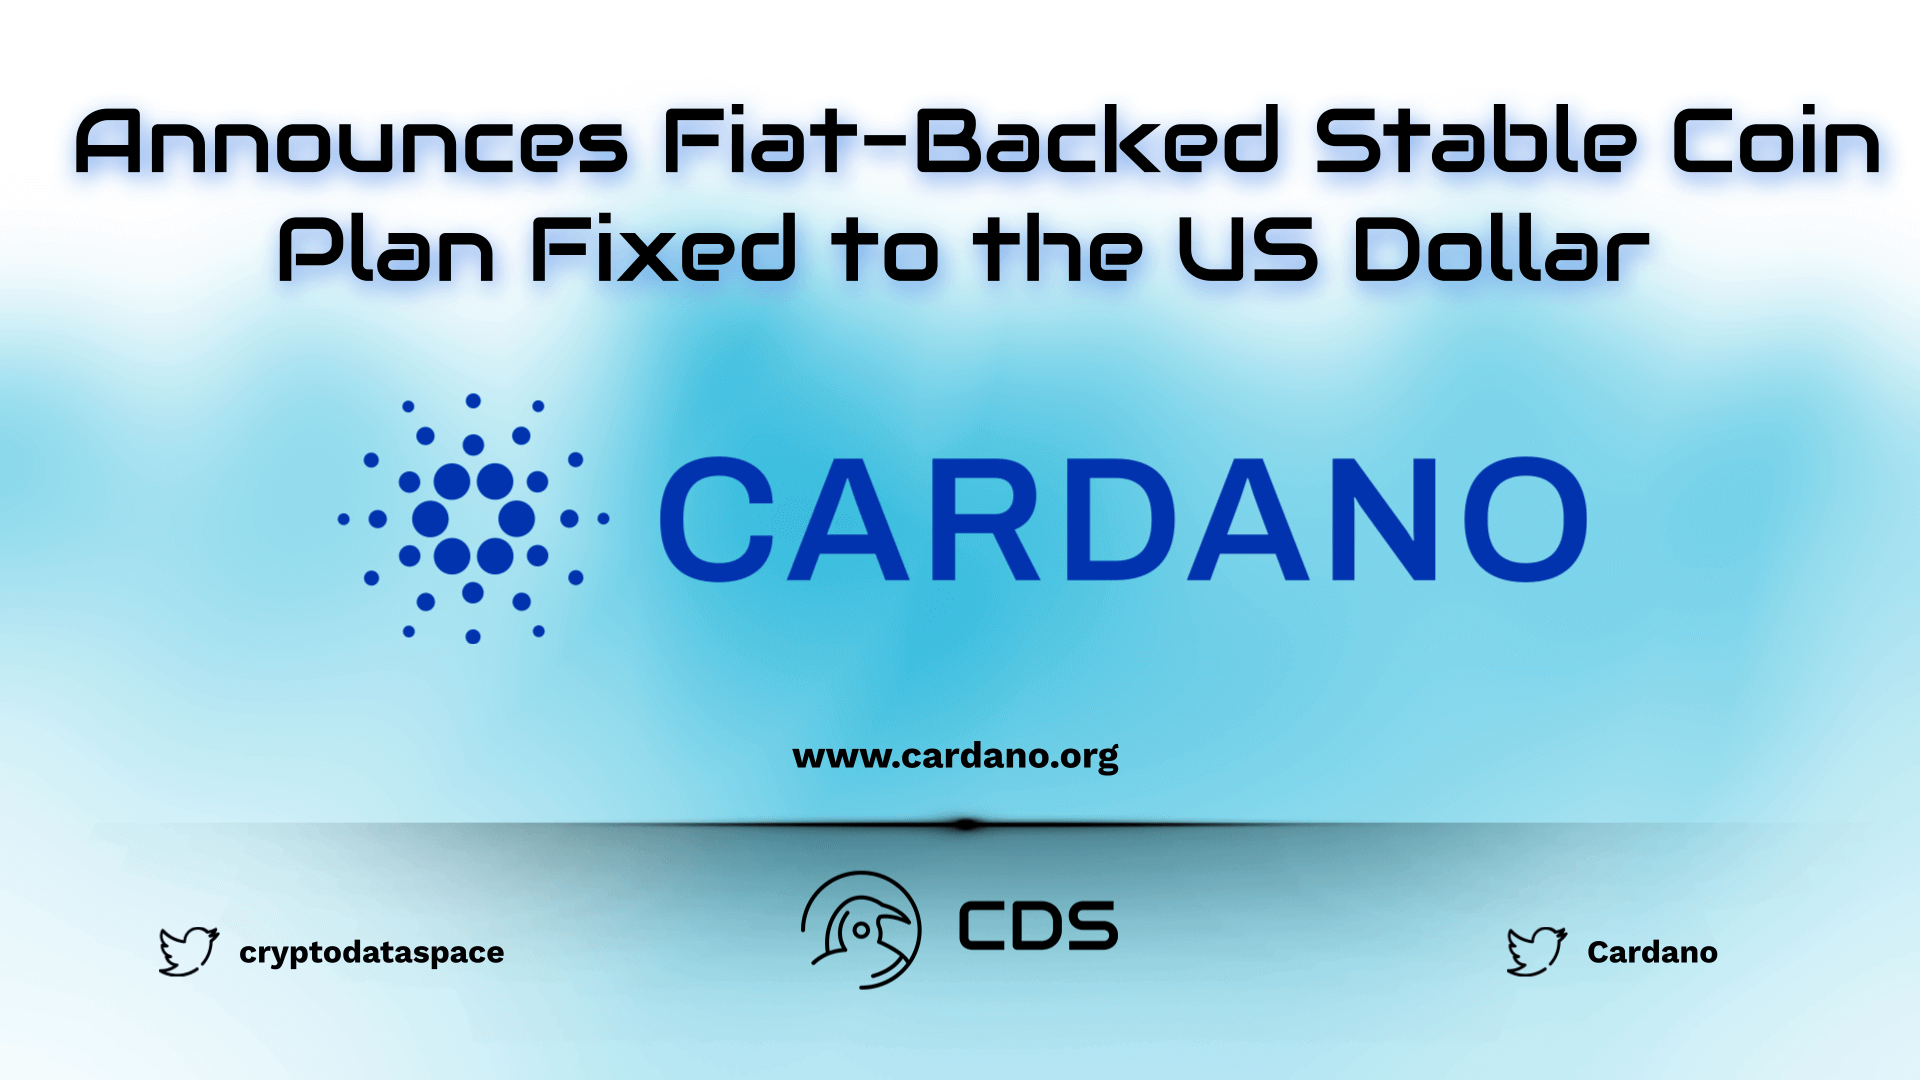 Cardano (ADA) Announces Fiat-Backed Stable Coin